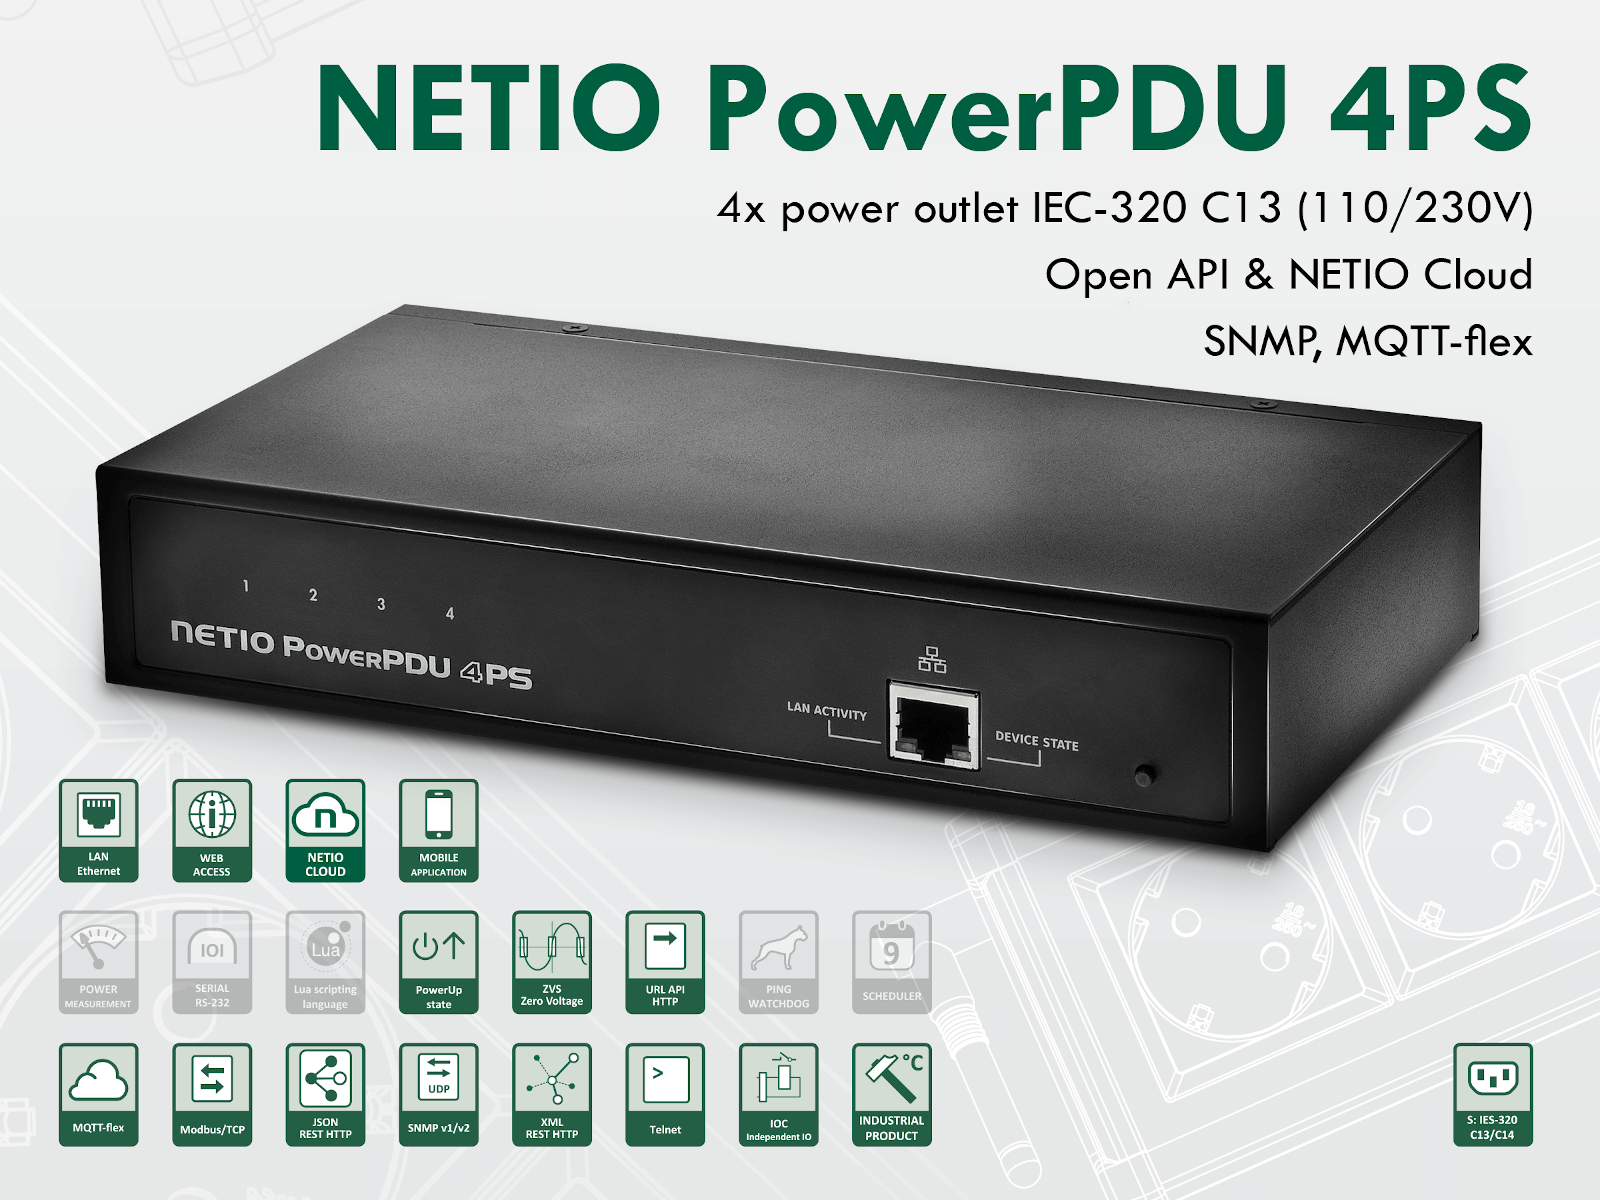 NETIO PowerPDU 4PS in PaperBox with EU power-cable included. LAN PDU with 4x C13 power output, each output can be switched individually, ZVS. NETIO Coud + Several M2M APIs, SNMPv1 &amp; MQTT-flex support